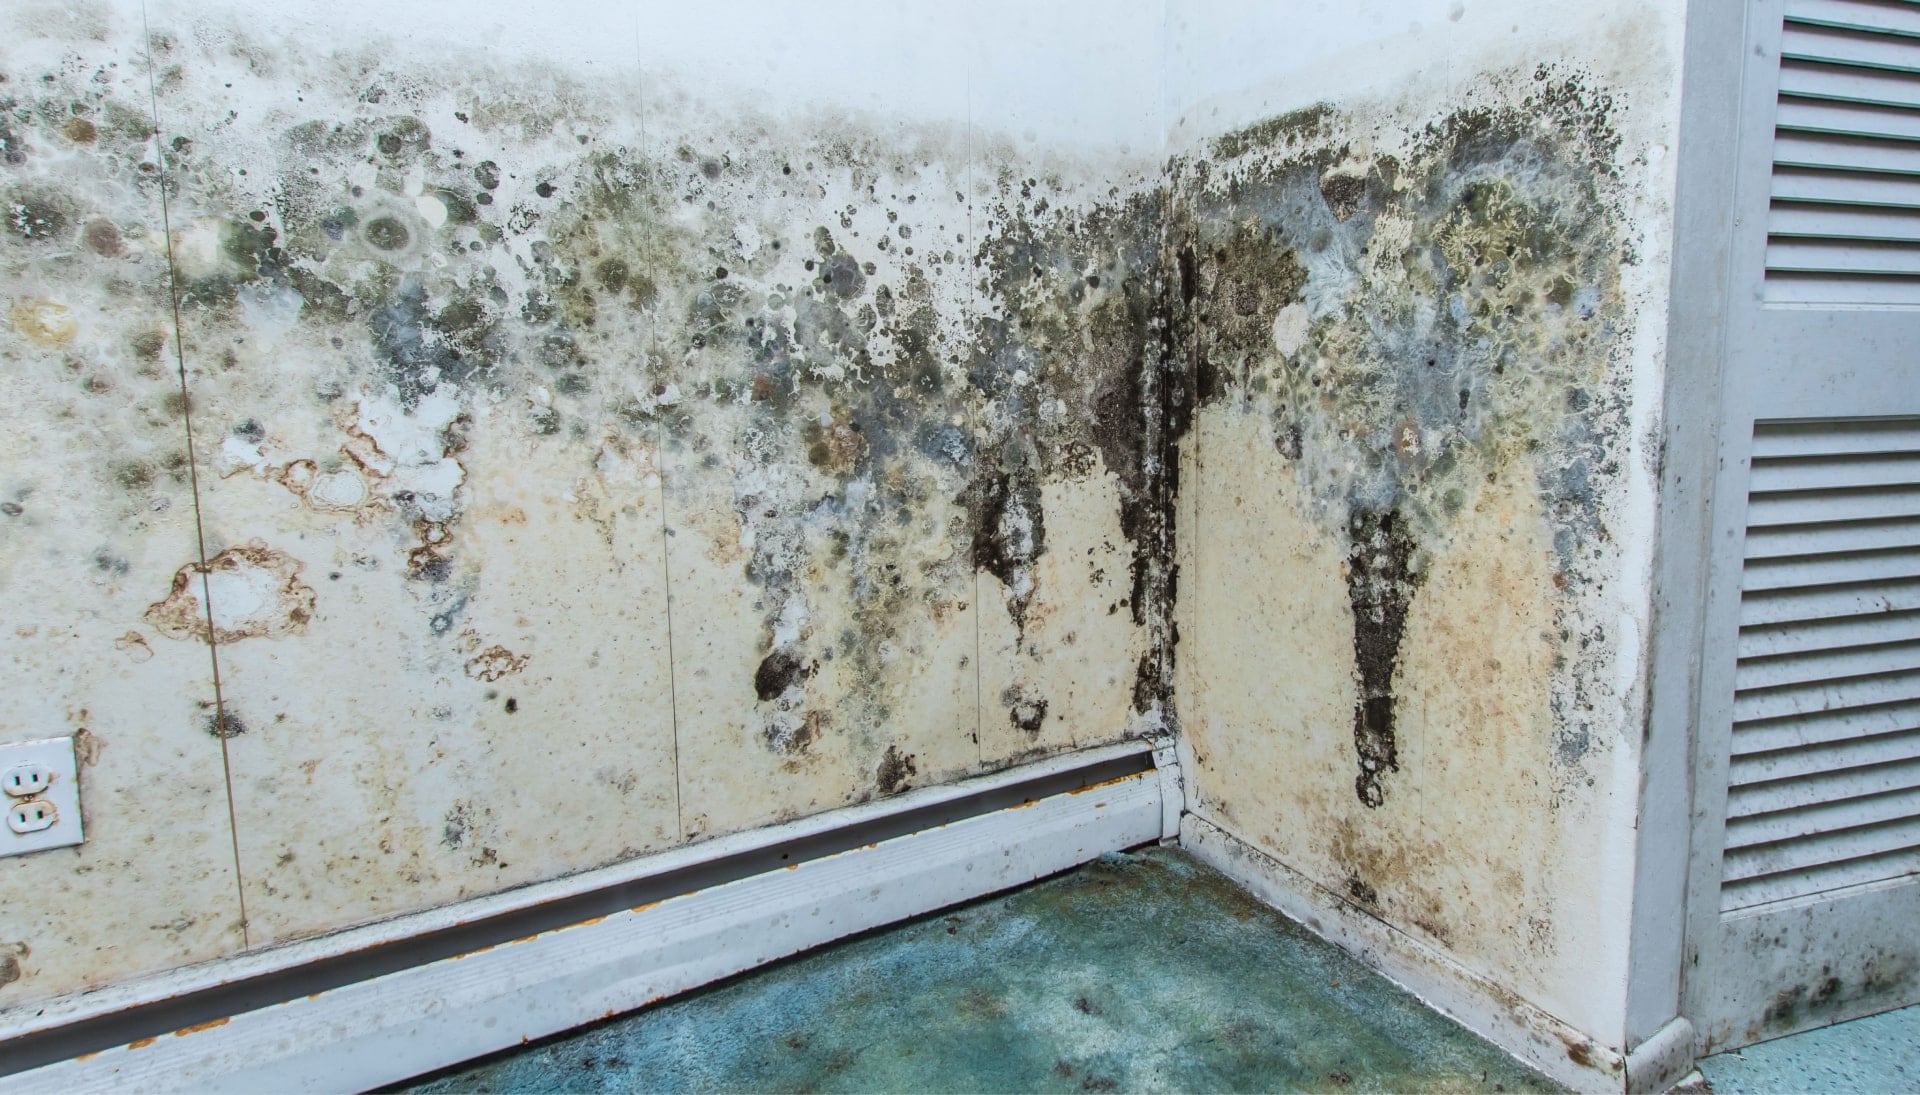 Professional mold removal, odor control, and water damage restoration service in Matthews, North Carolina.